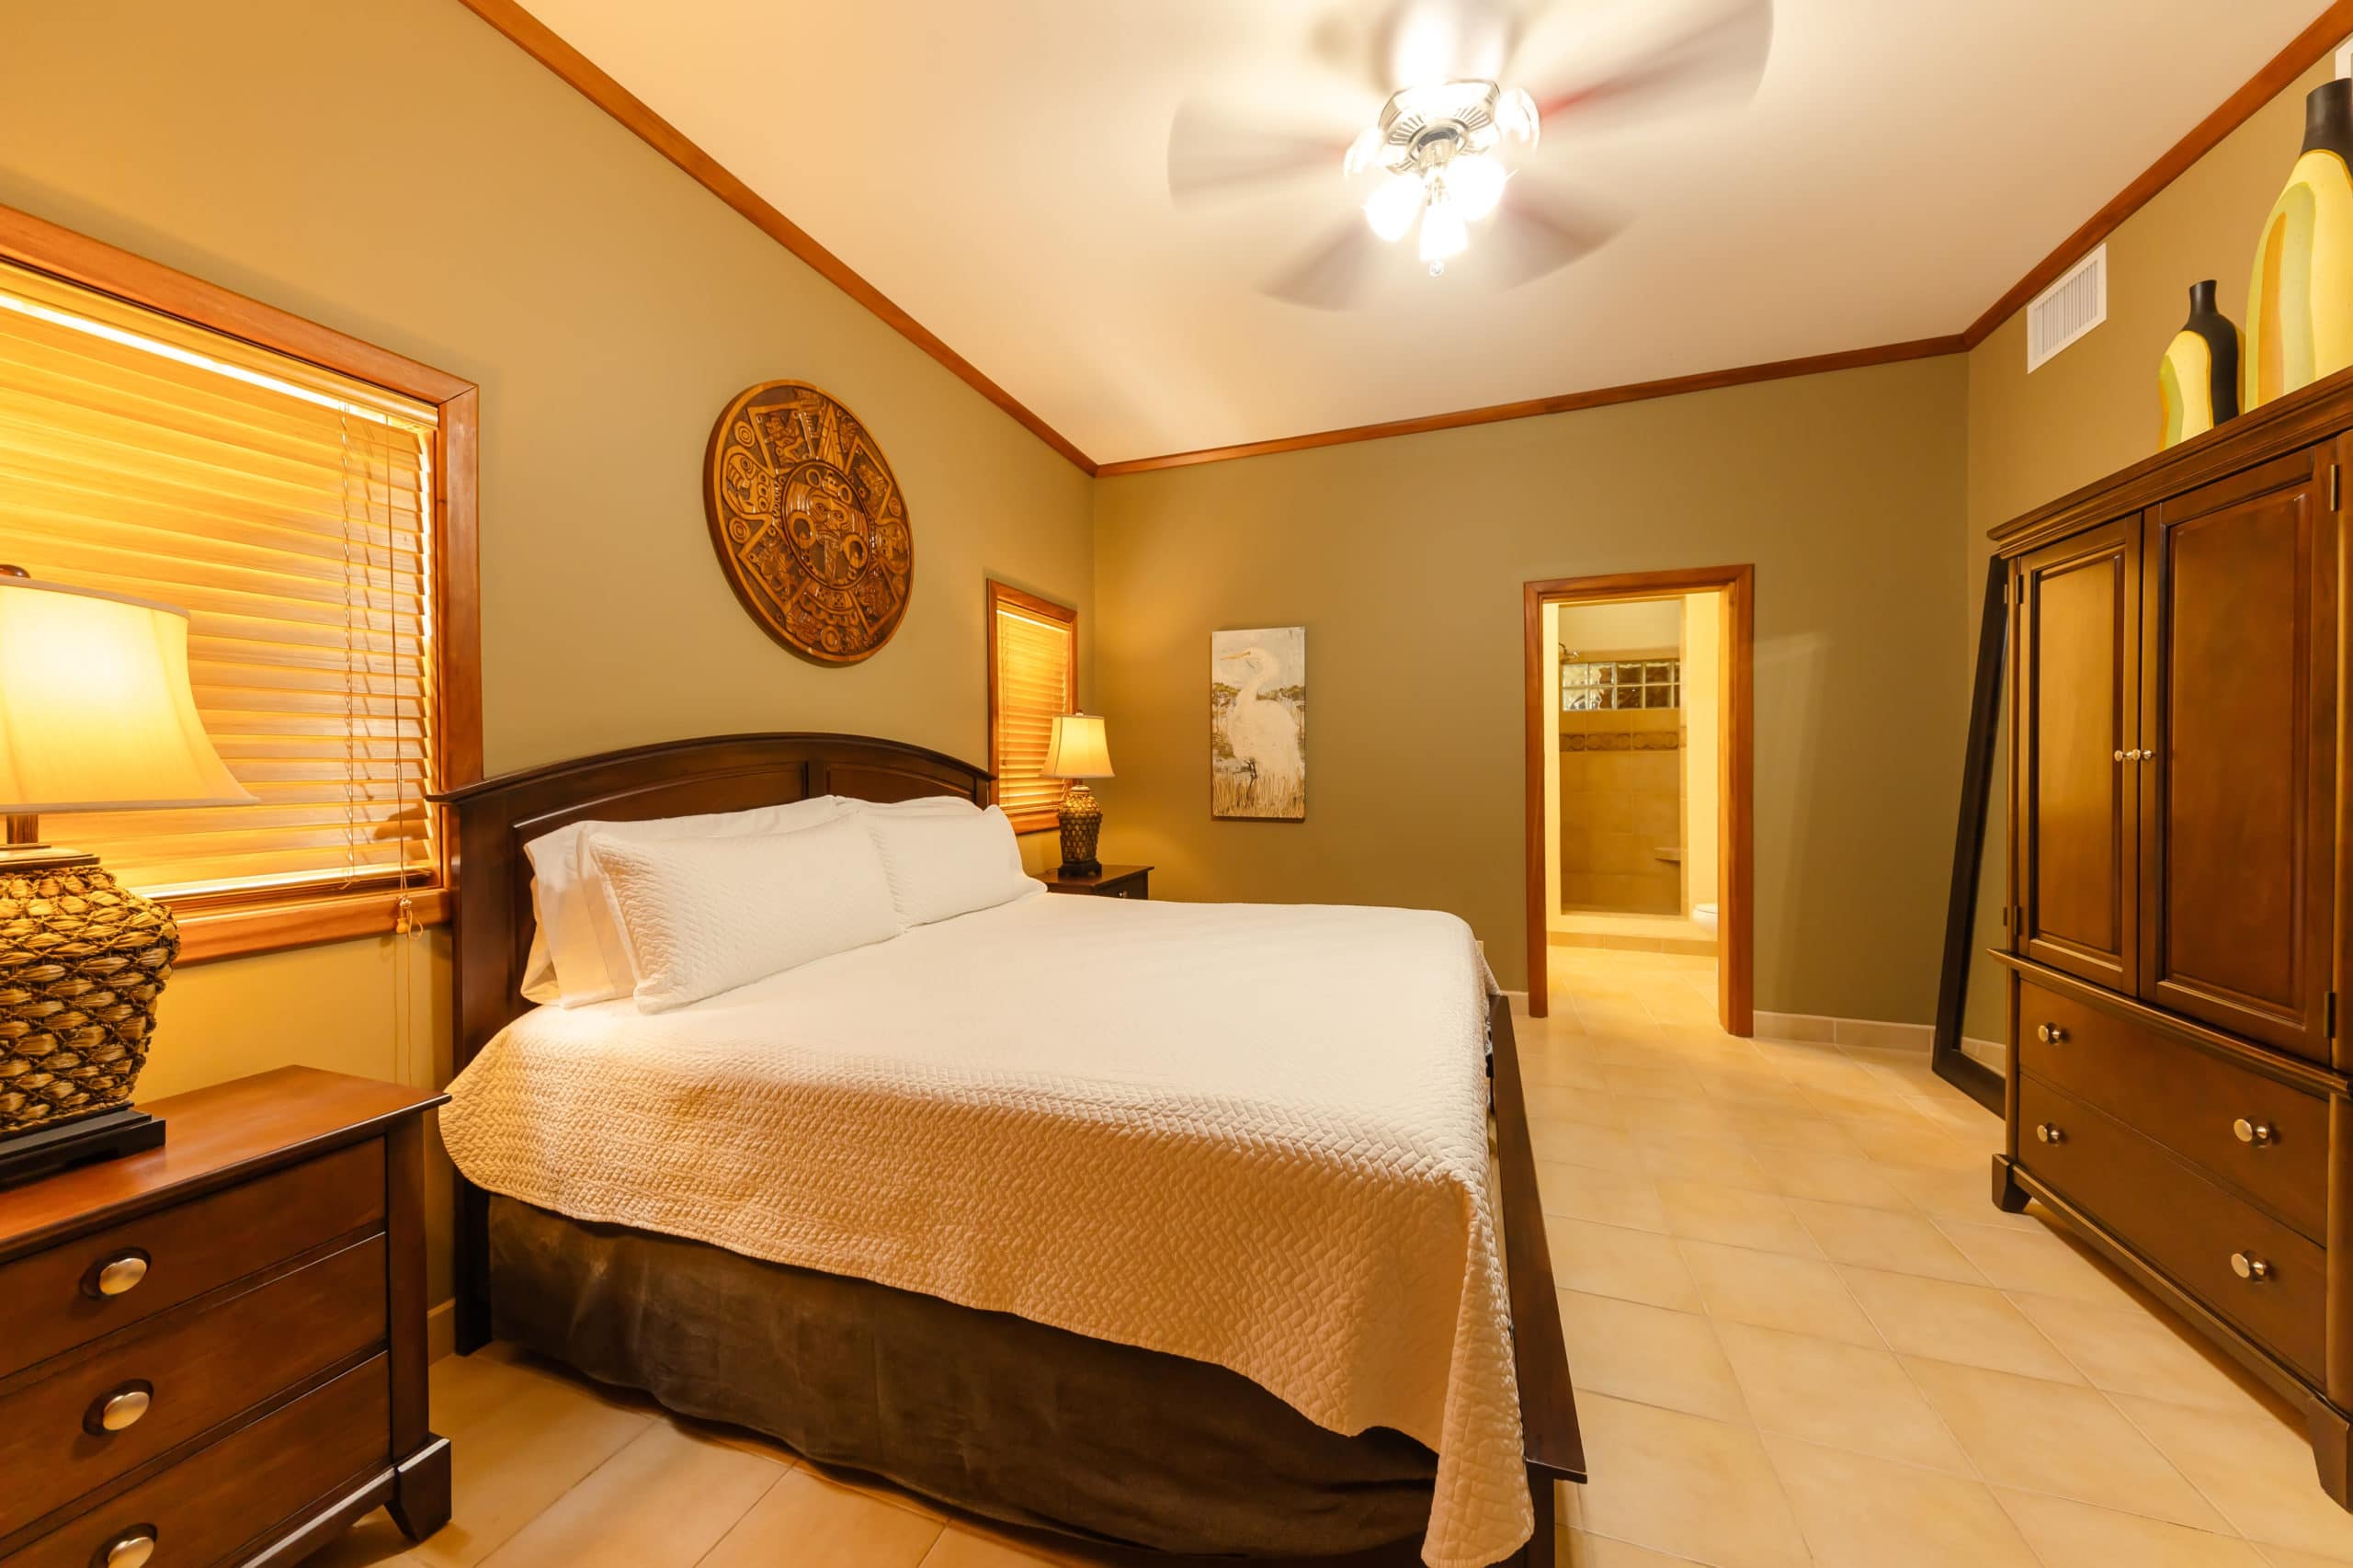 Spacious master bedroom with comfortable king-size bed, elegant decor, and ample natural light.